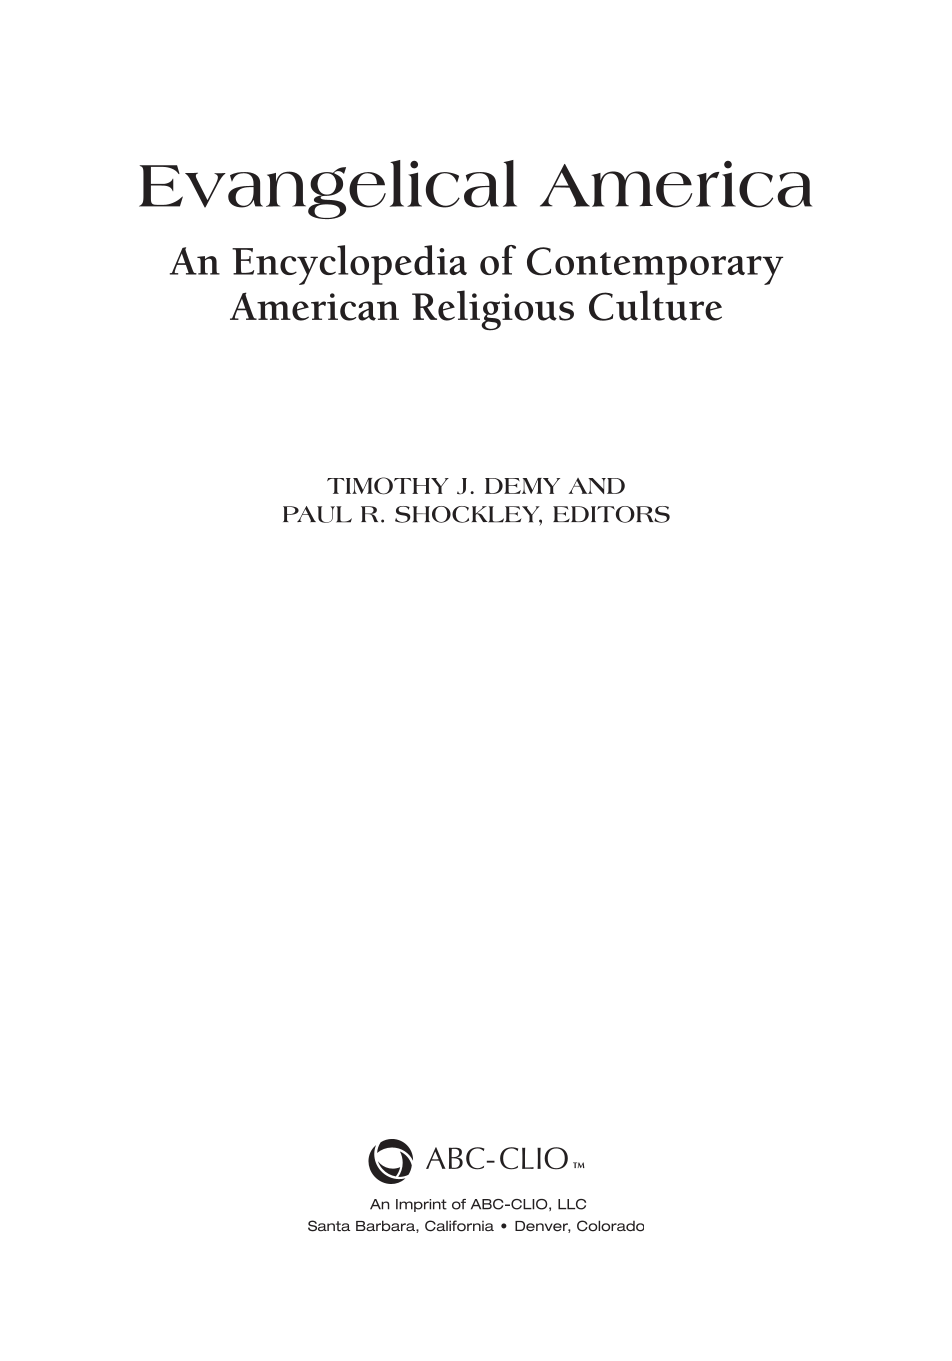 Evangelical America: An Encyclopedia of Contemporary American Religious Culture page iii